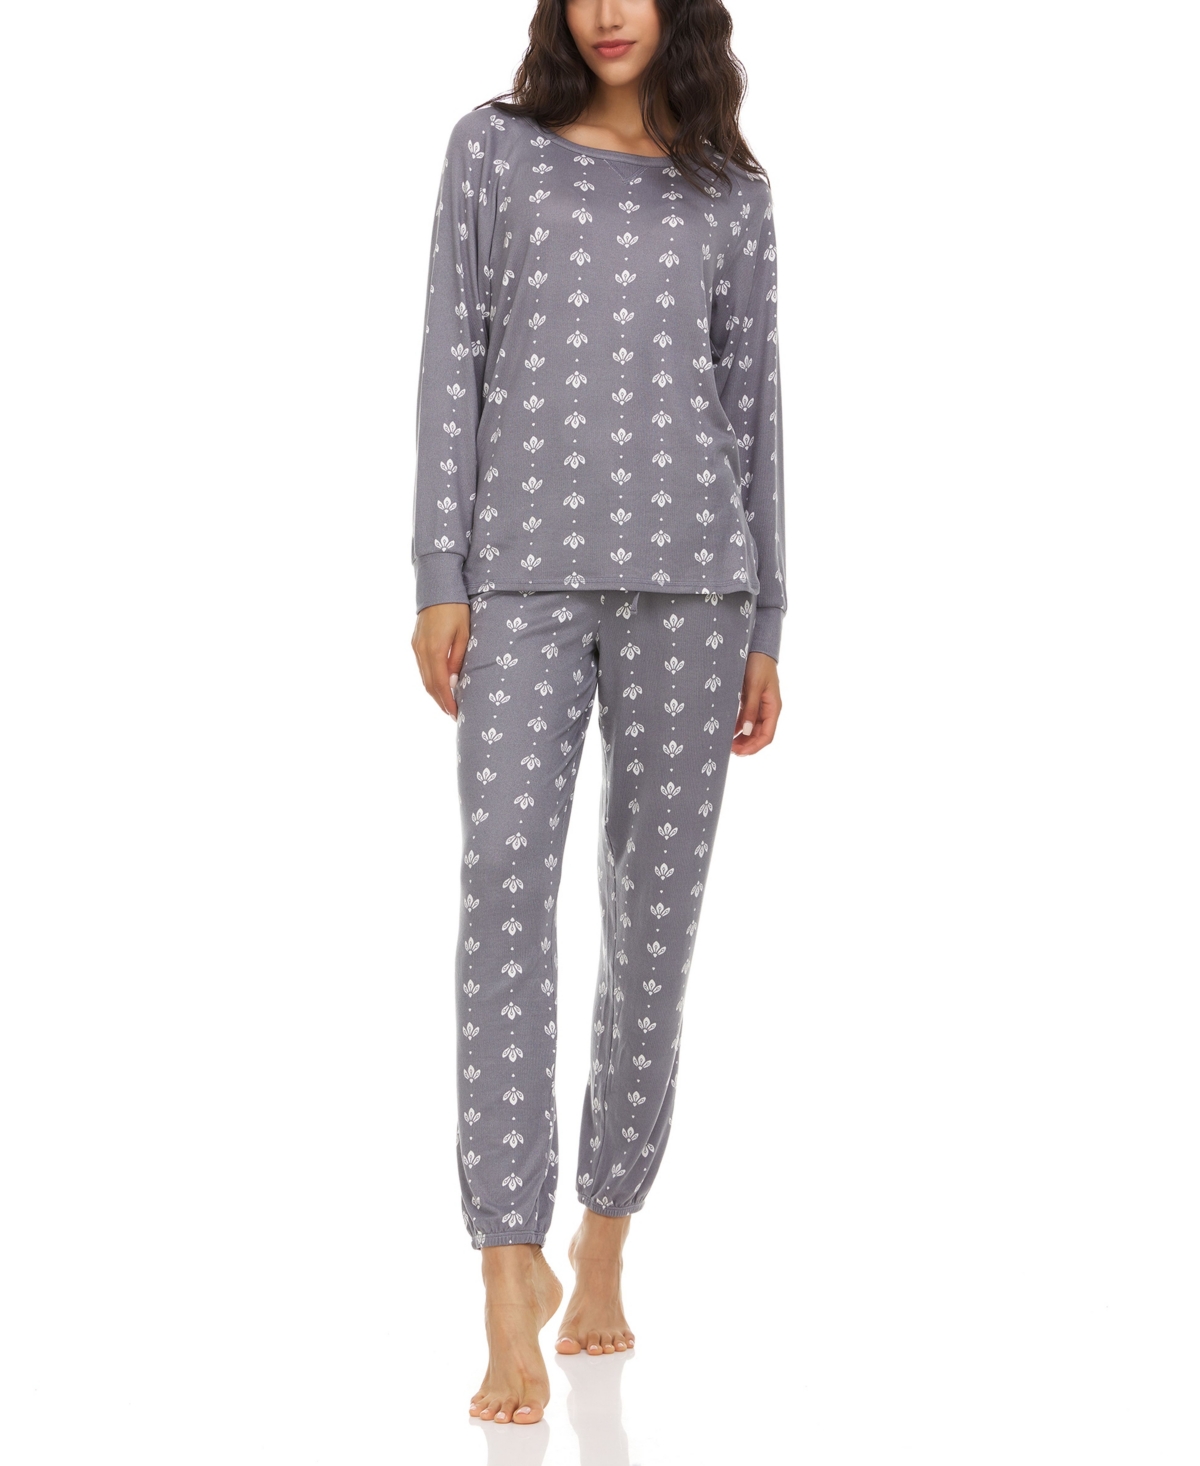 Flora Nikrooz Collection Women's Marian Dreamy Sweater Knit Pajama Set, 2 Pieces